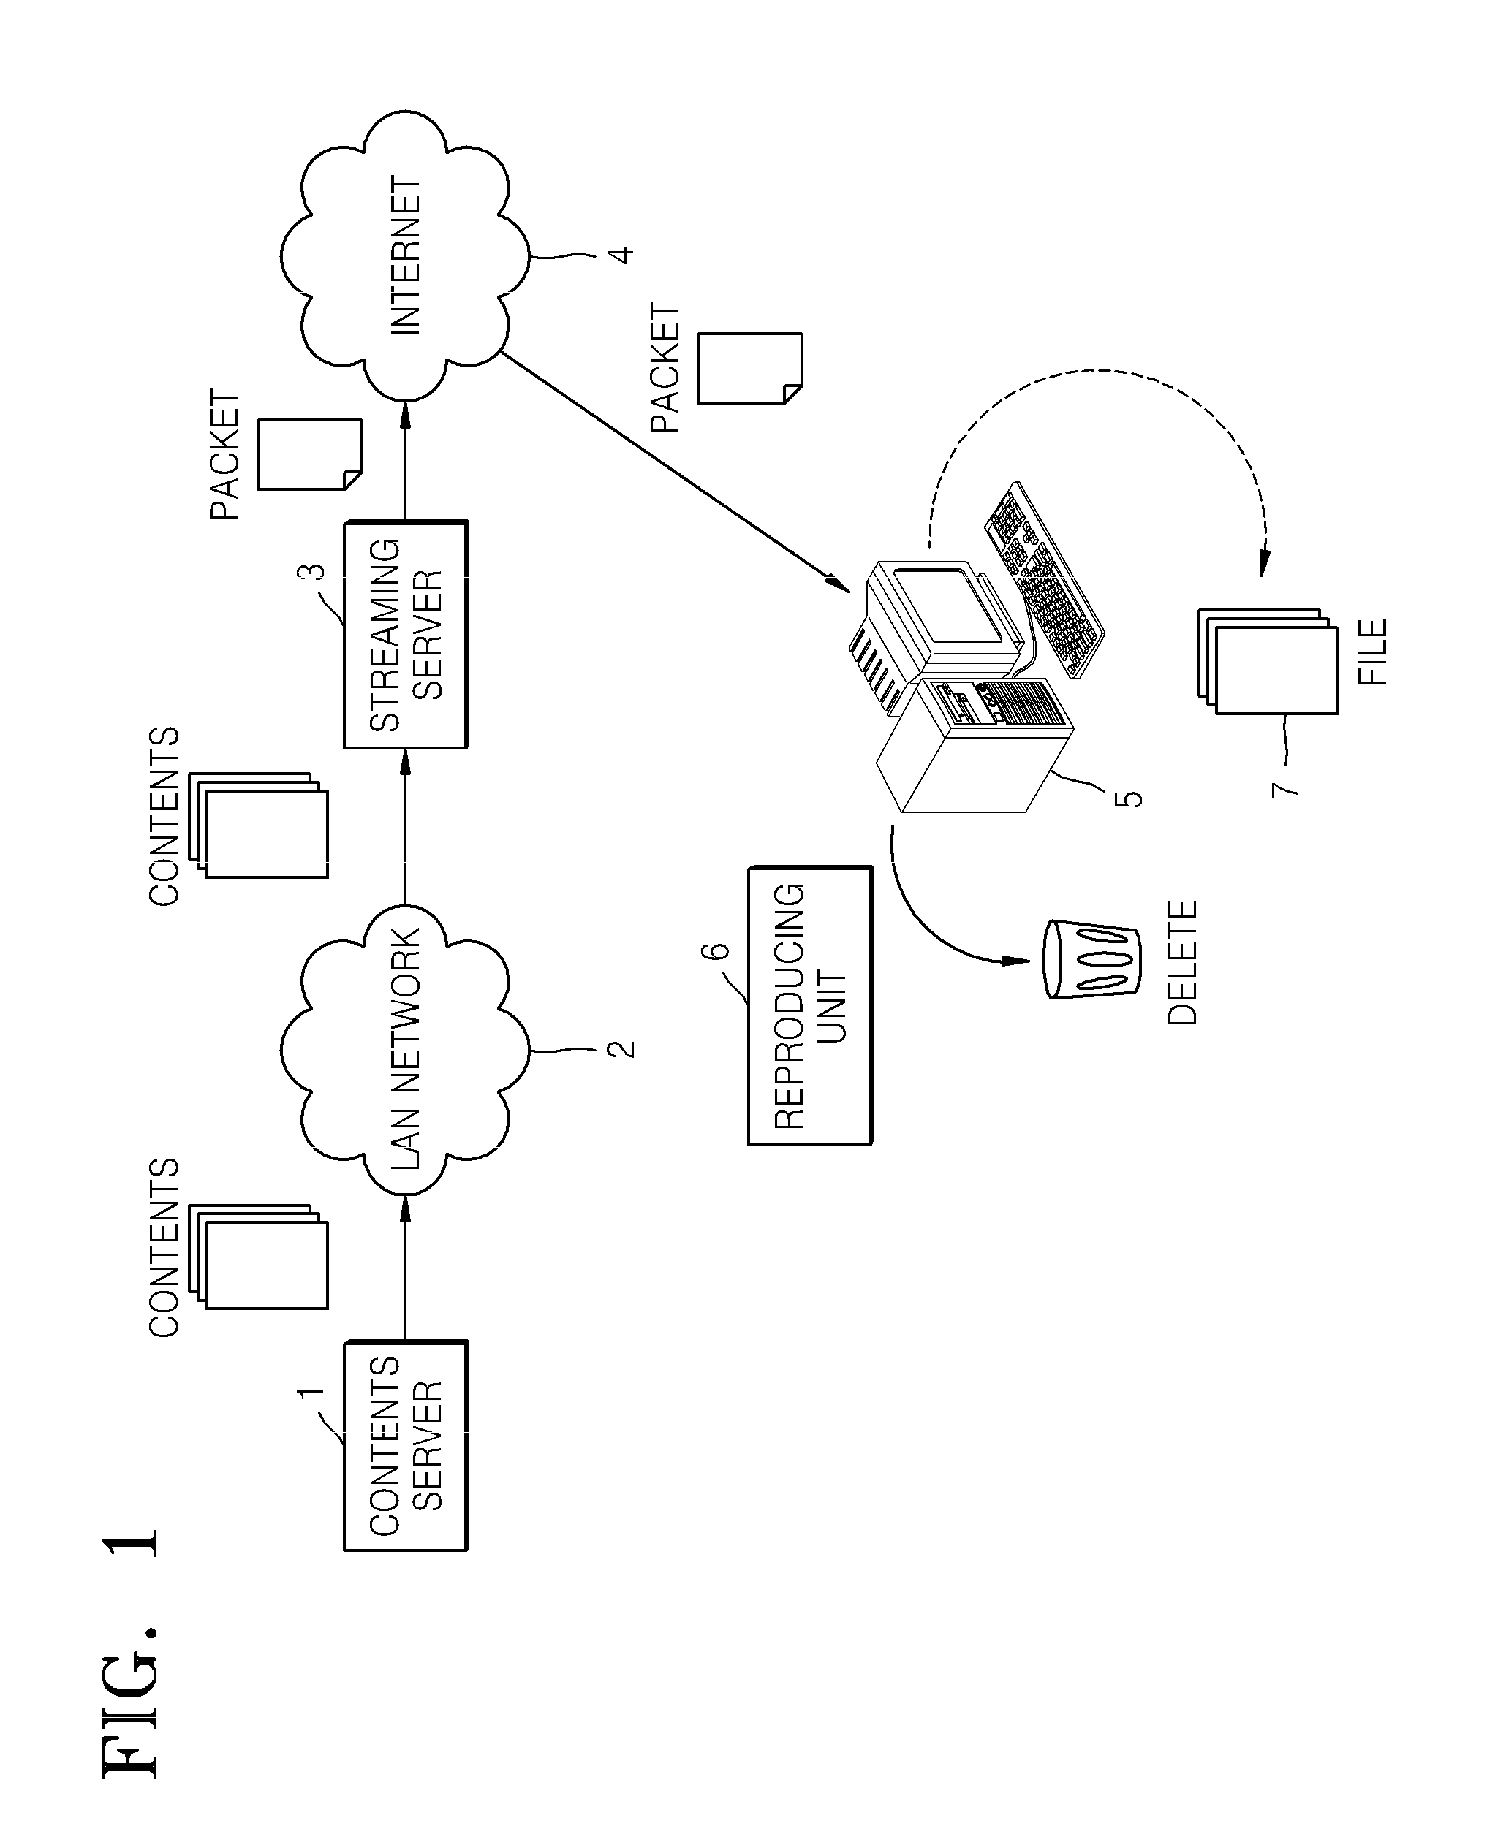 System and method of protecting digital media contents